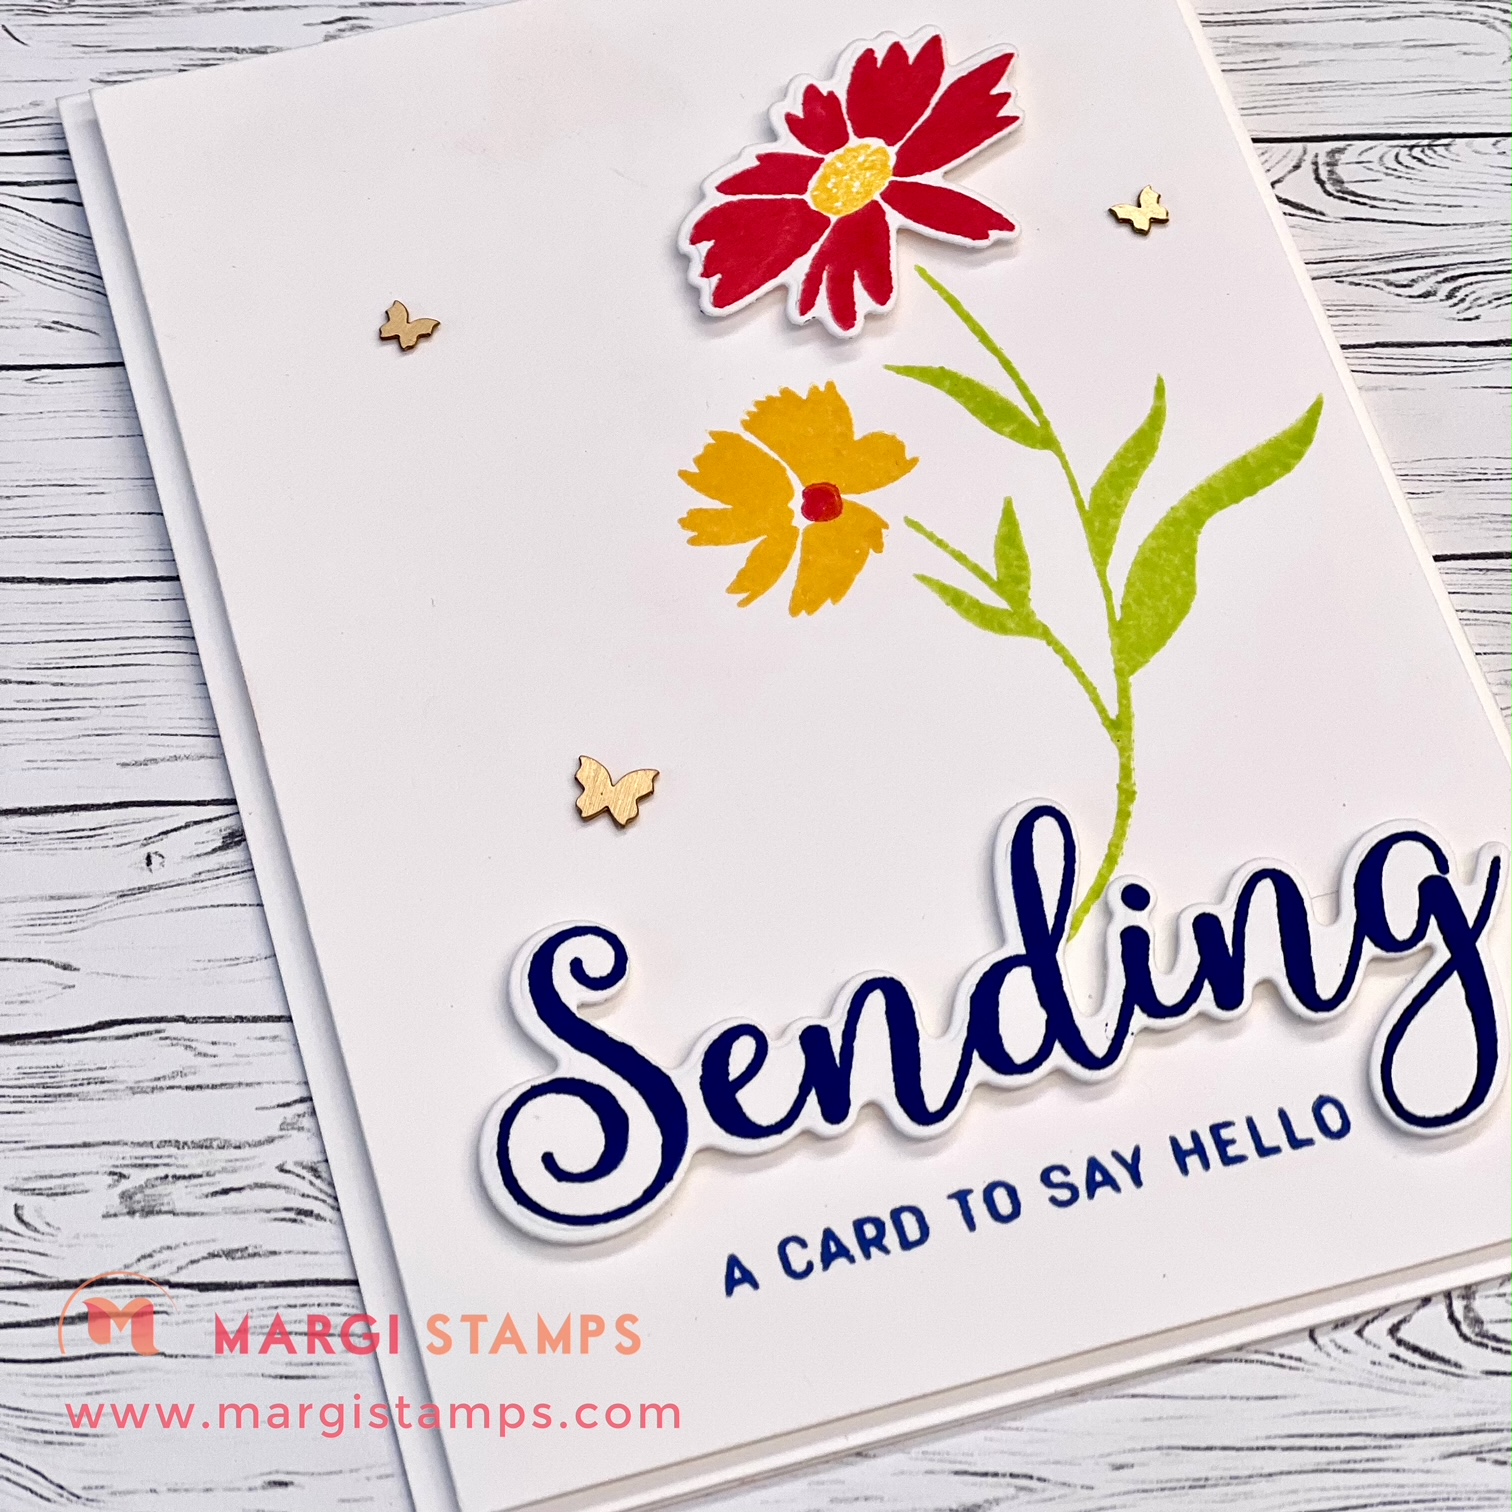 Sending Smiles & Tea Boutique Paper by Stampin’ Up!